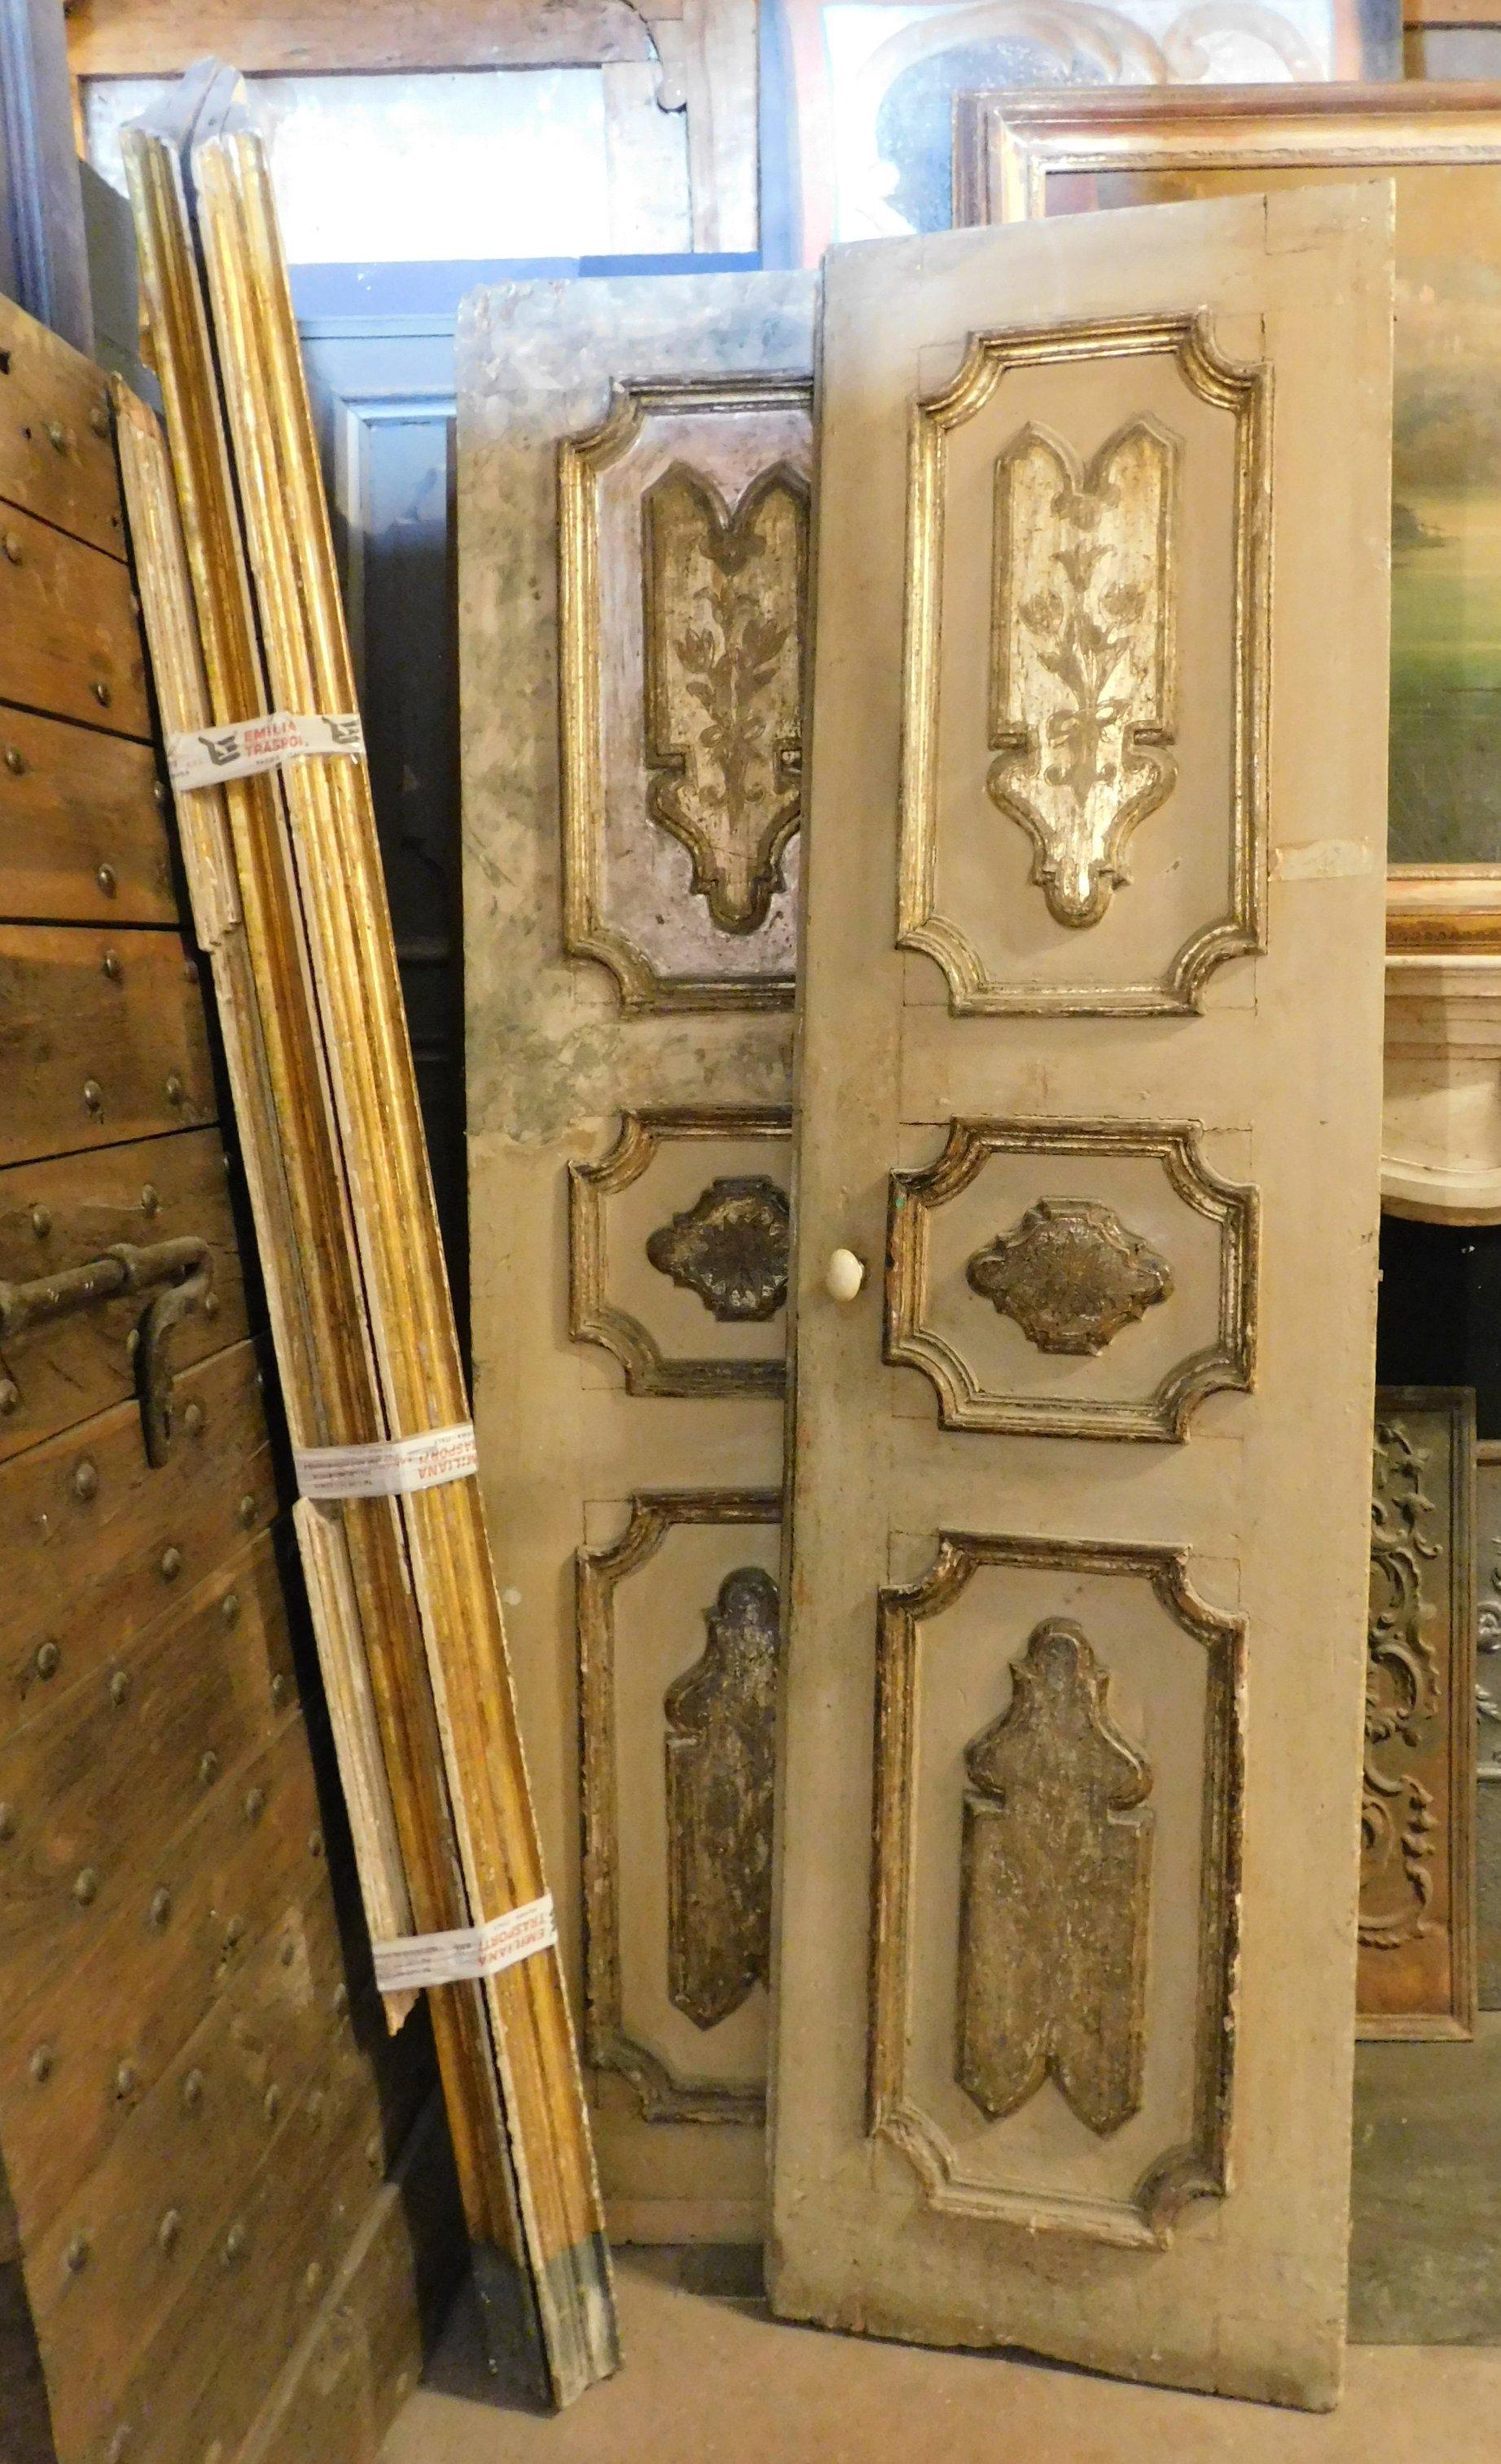 Antique Set of 3 Double-Wing Doors, Ivory and Gilded, 18th Century, Italy For Sale 2